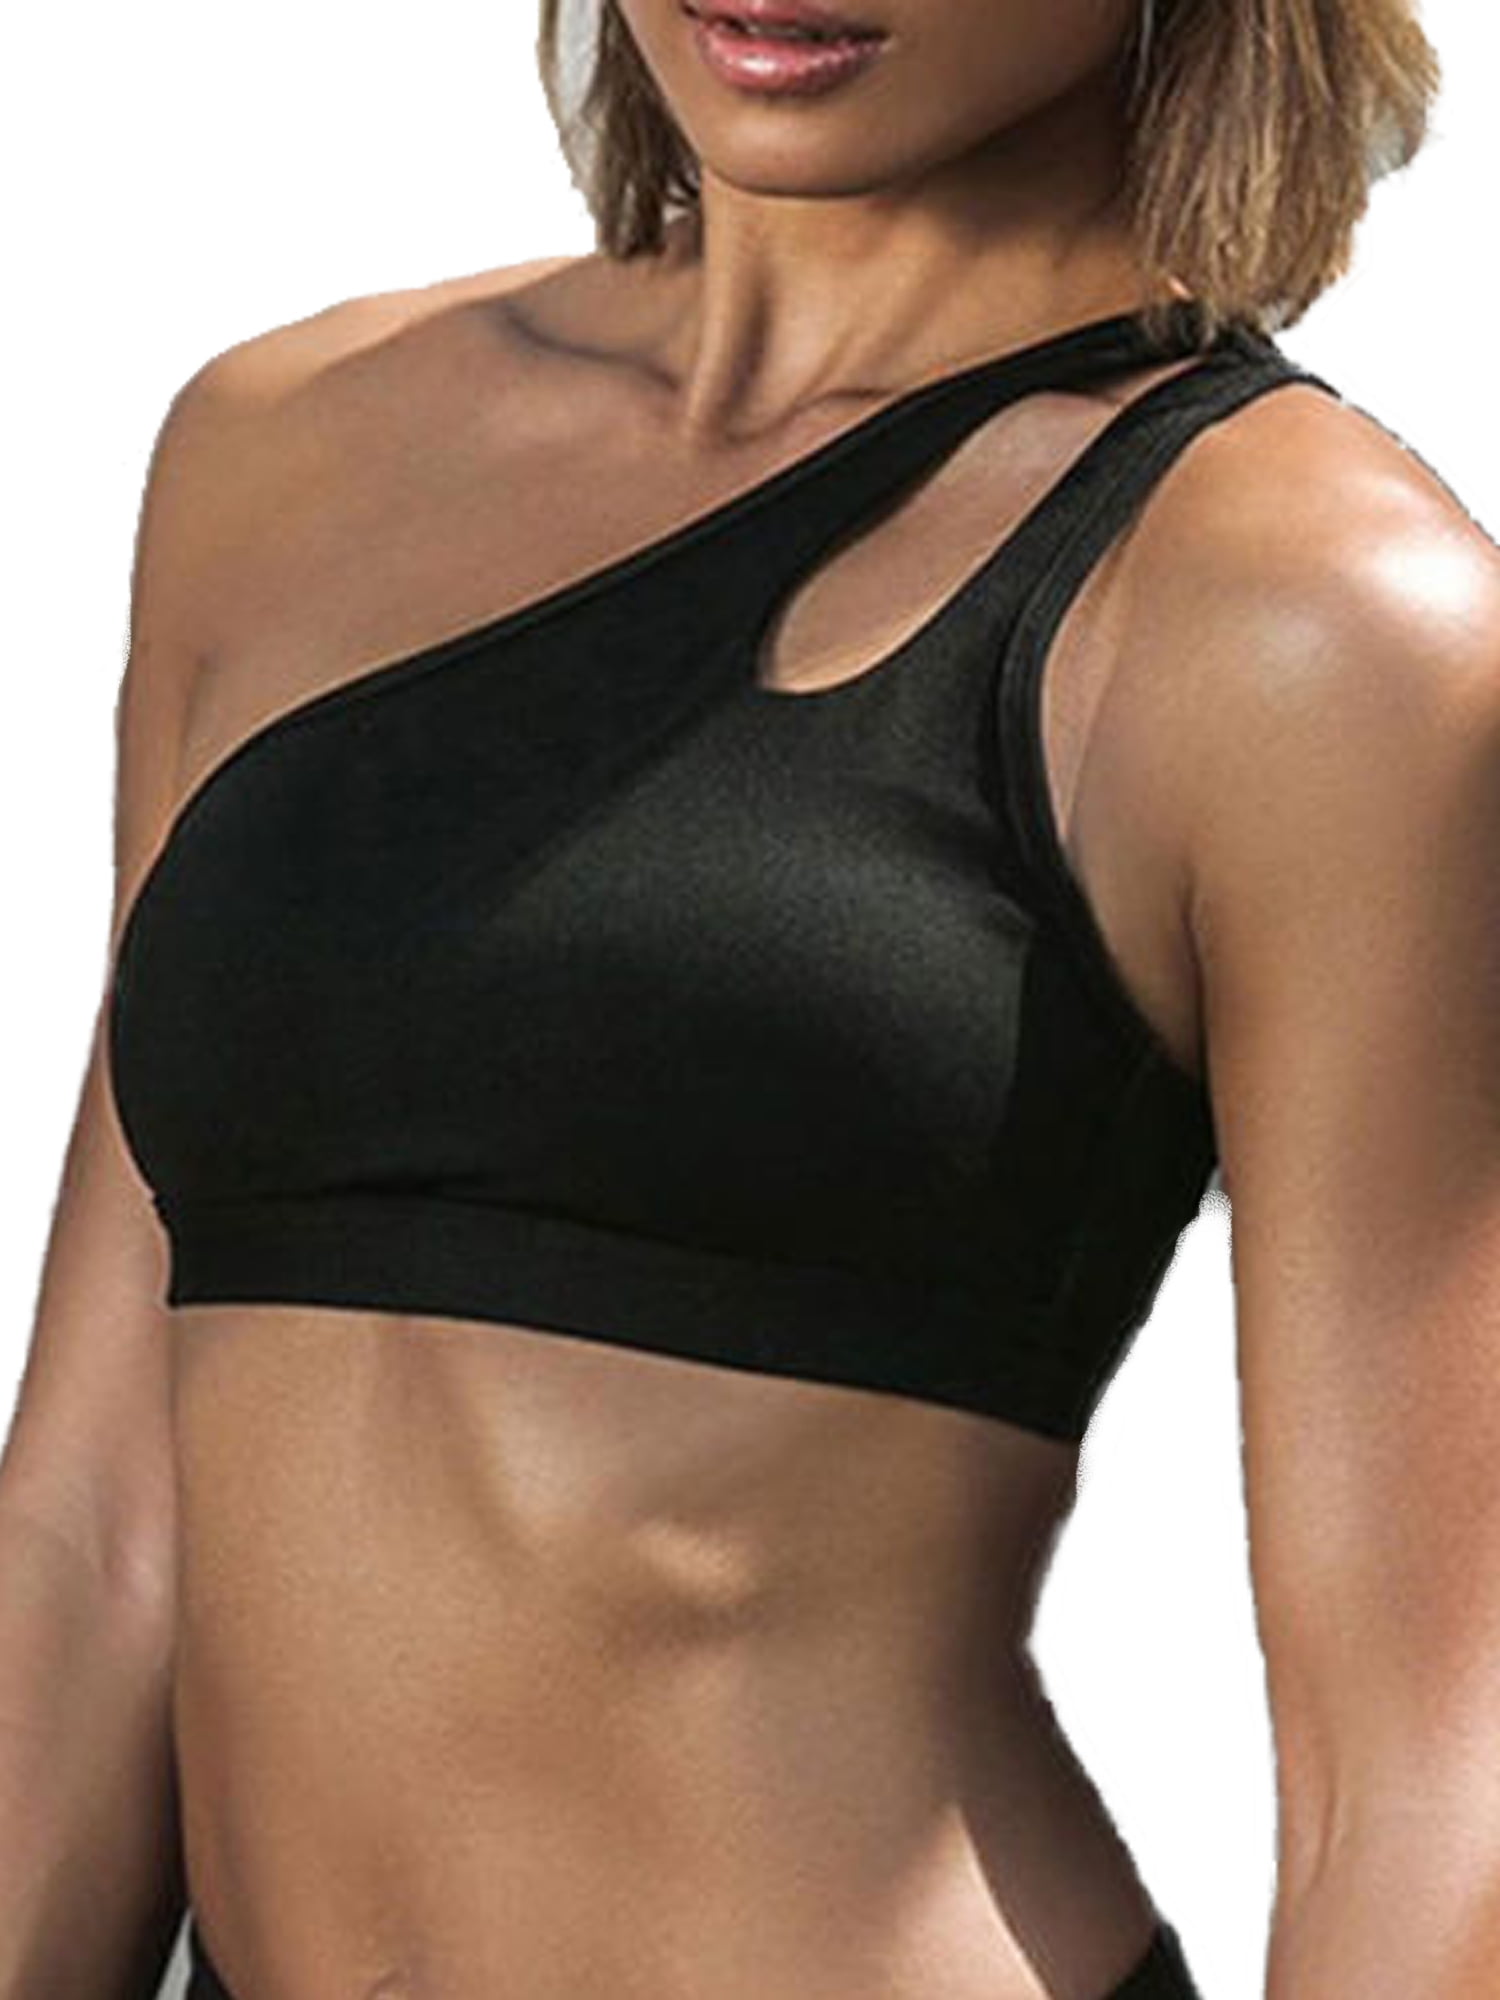 Anna-Kaci Women Solid Crop Yoga Running Sports Workout Gym Athletic Padded Top